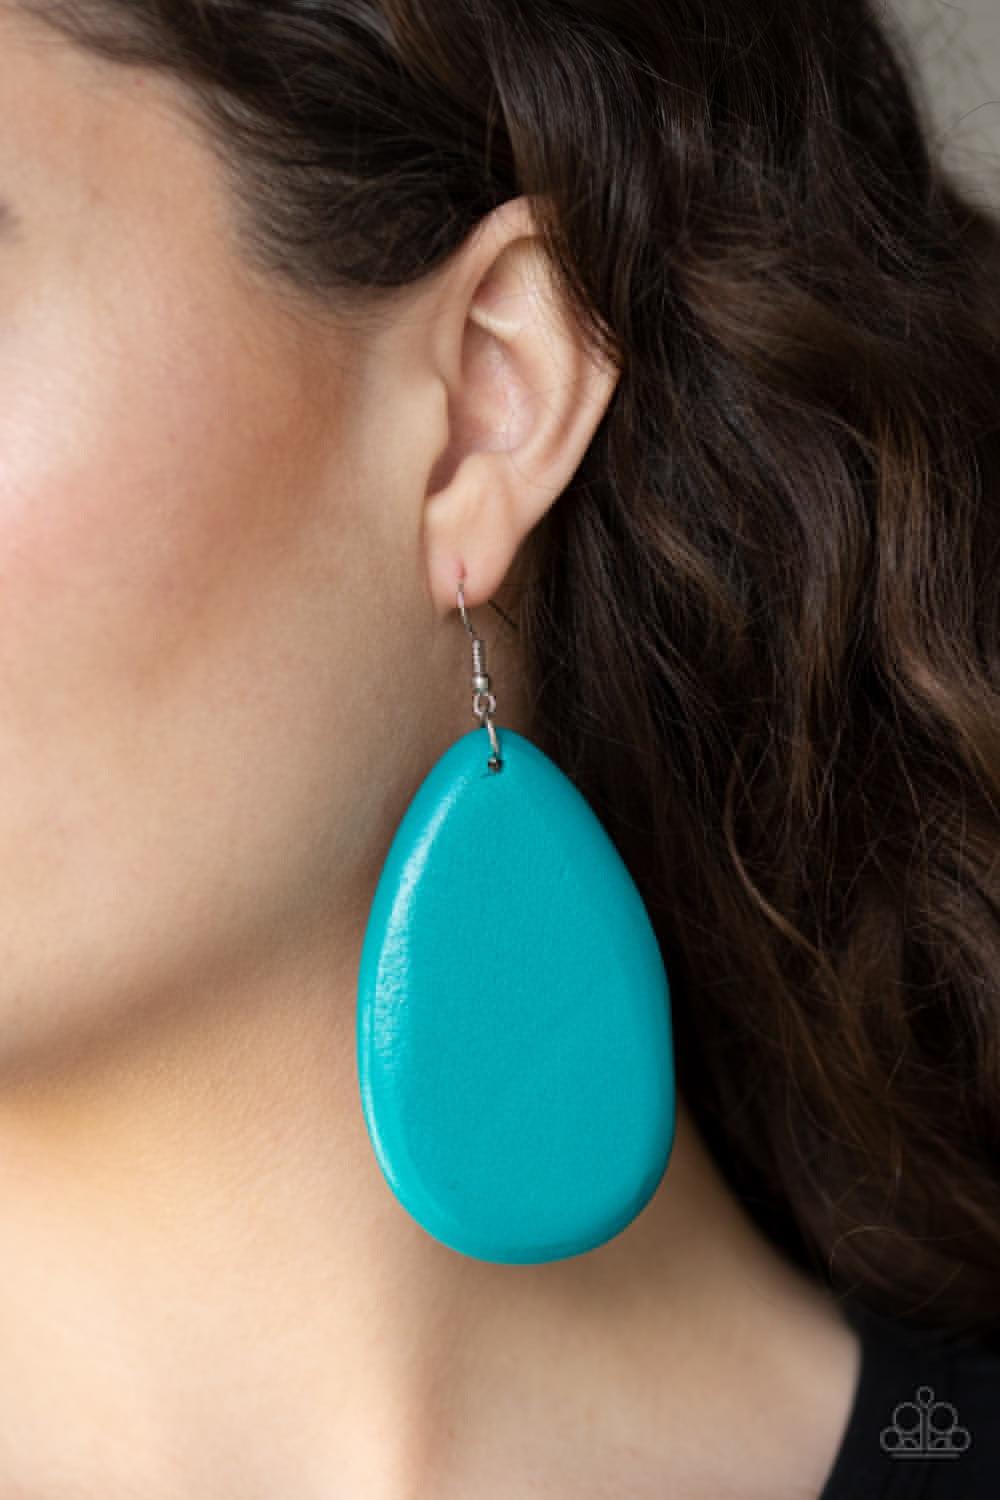 Paparazzi Accessories Beach Bride - Blue Brushed in a shiny finish, a vibrant teal wooden teardrop frame swings from the ear for a seasonal flair. Earring attaches to a standard fishhook fitting. Jewelry